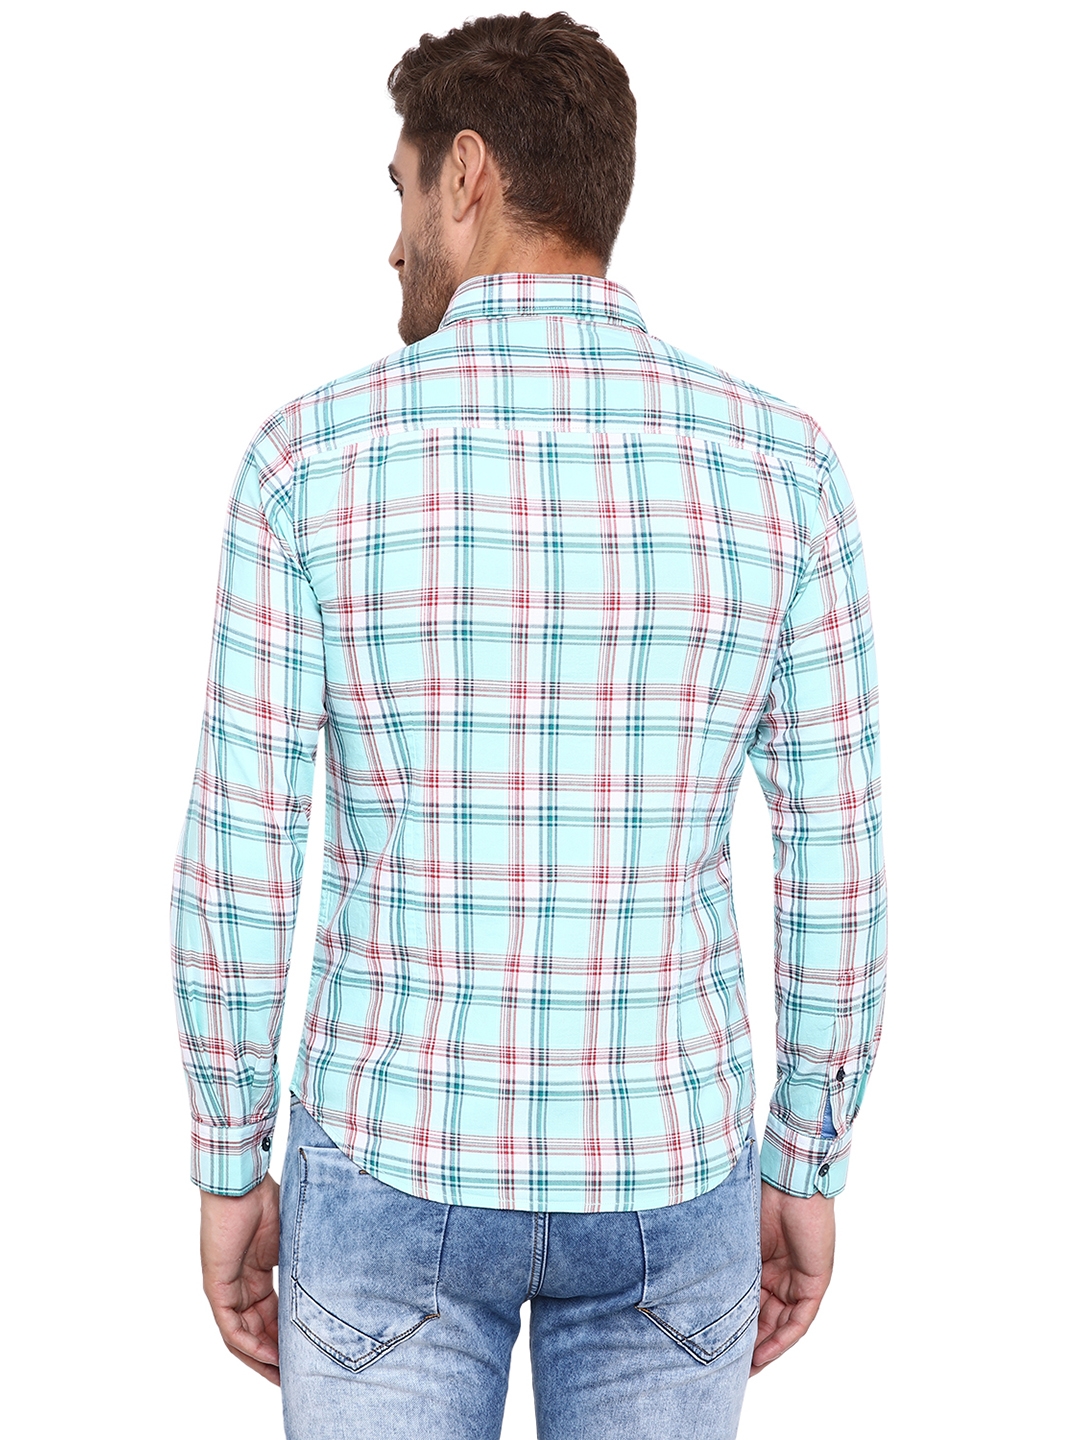 Greenfibre | Sky Blue Checked Slim Fit Casual Shirt | Greenfibre 2